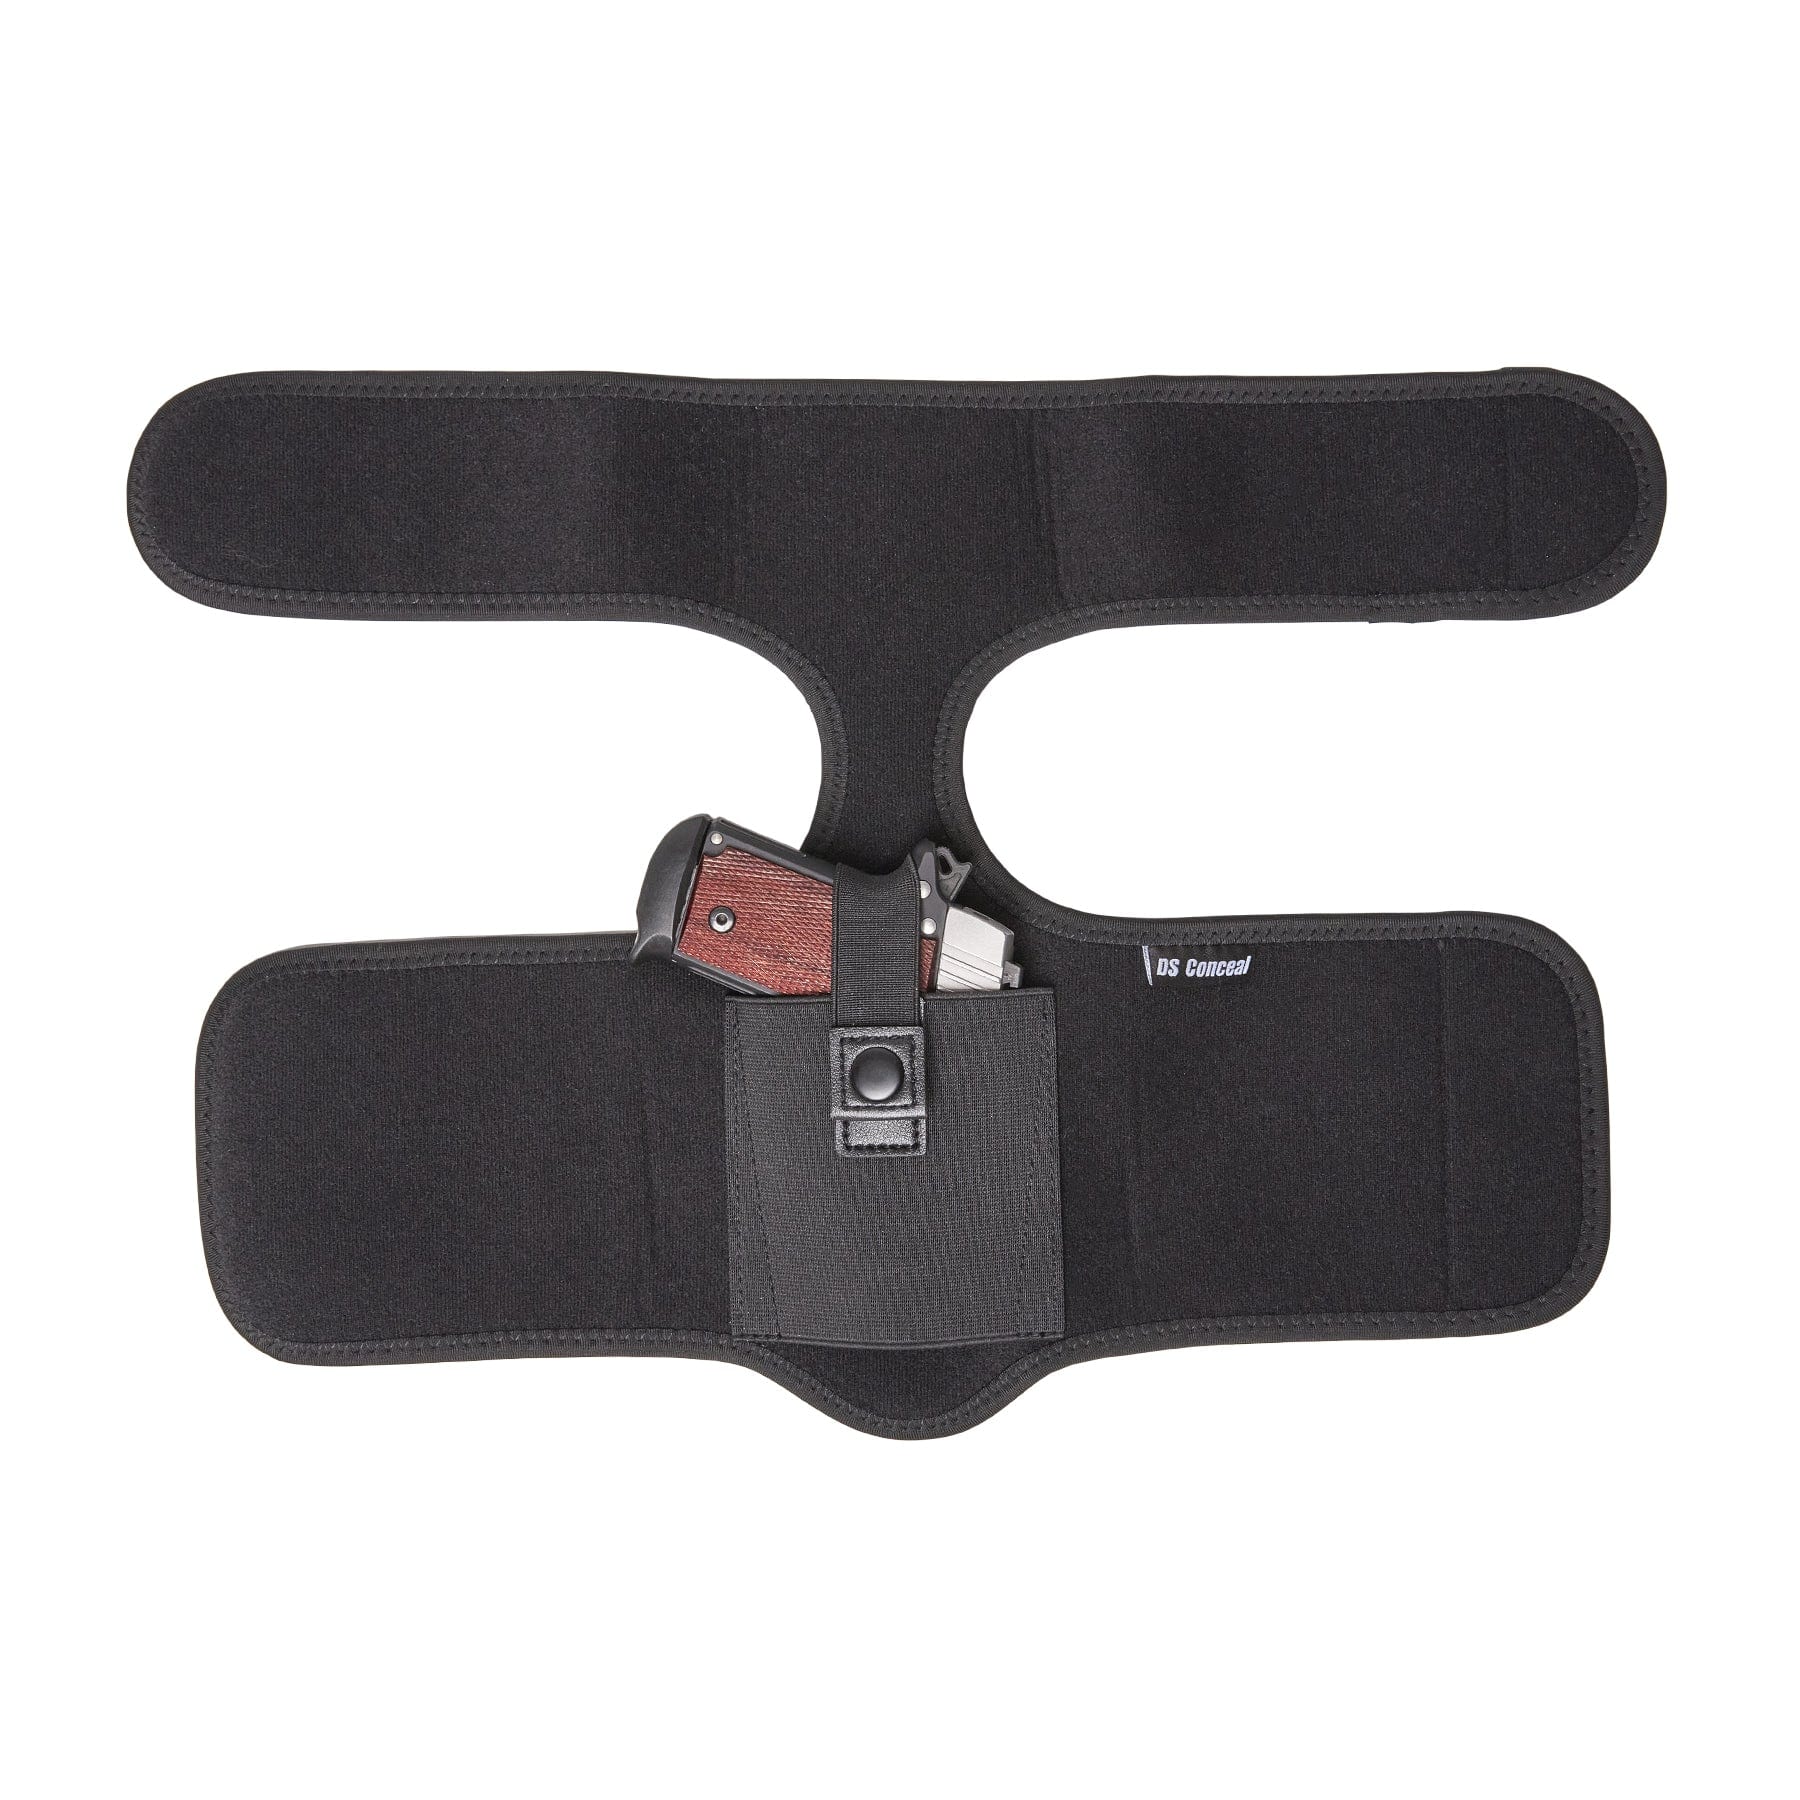 Unisex Neoprene Belly Band for Concealed Carry by DS Conceal